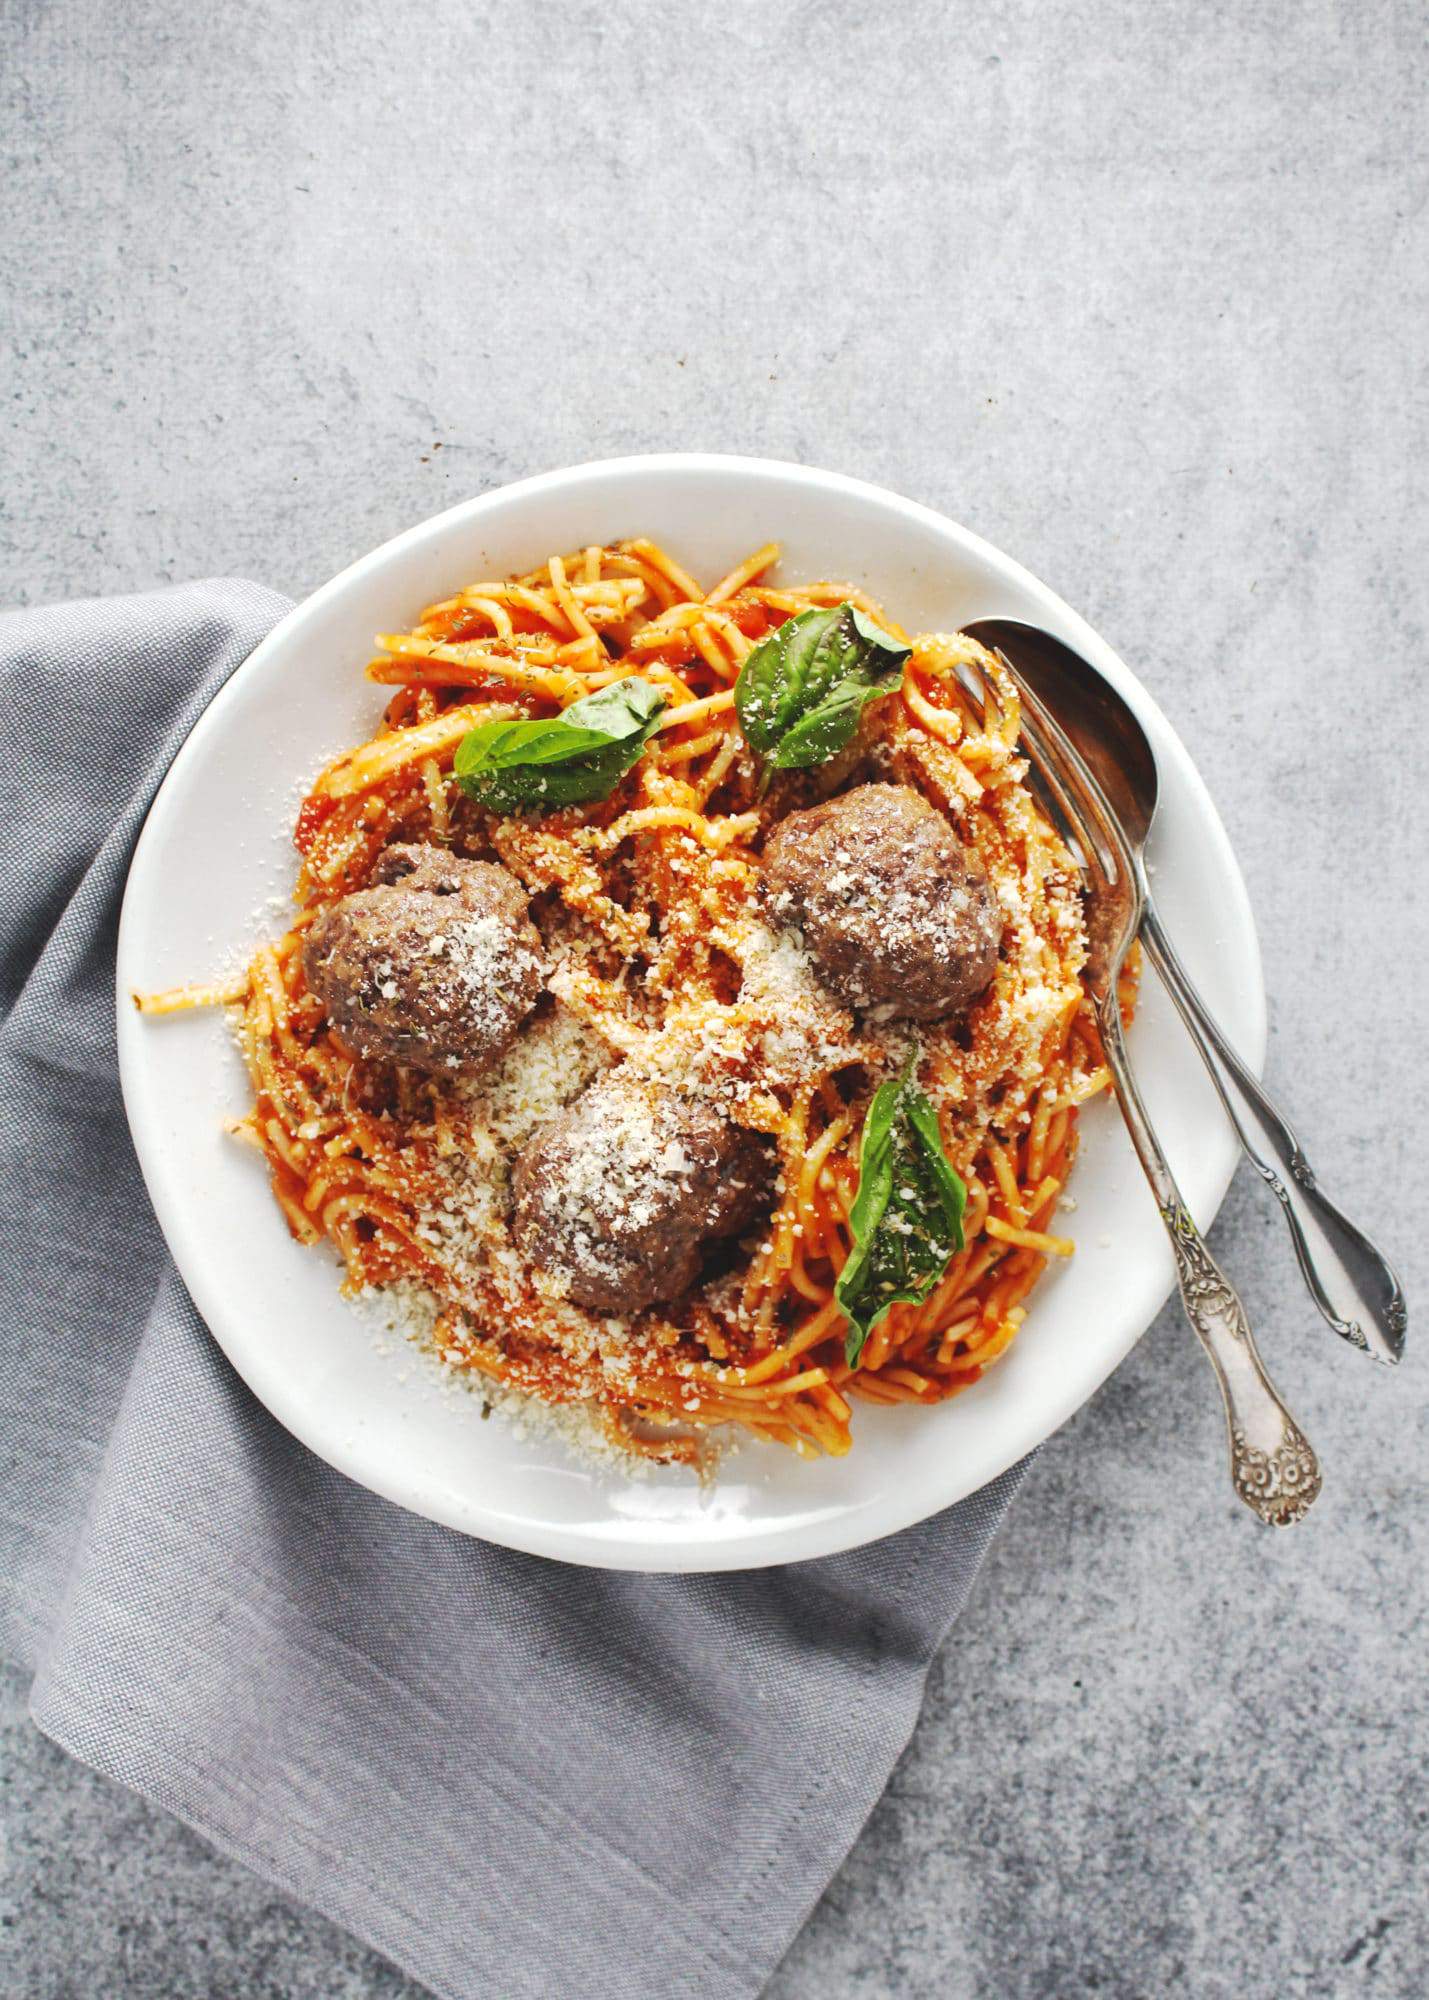 This recipe is a quick and easy dinner meal for when you're tired or want something easy and good that everyone will eat. Plus it's gluten free! | via @AimeeMarsLiving | #Spaghetti #Meatballs #GlutenFree